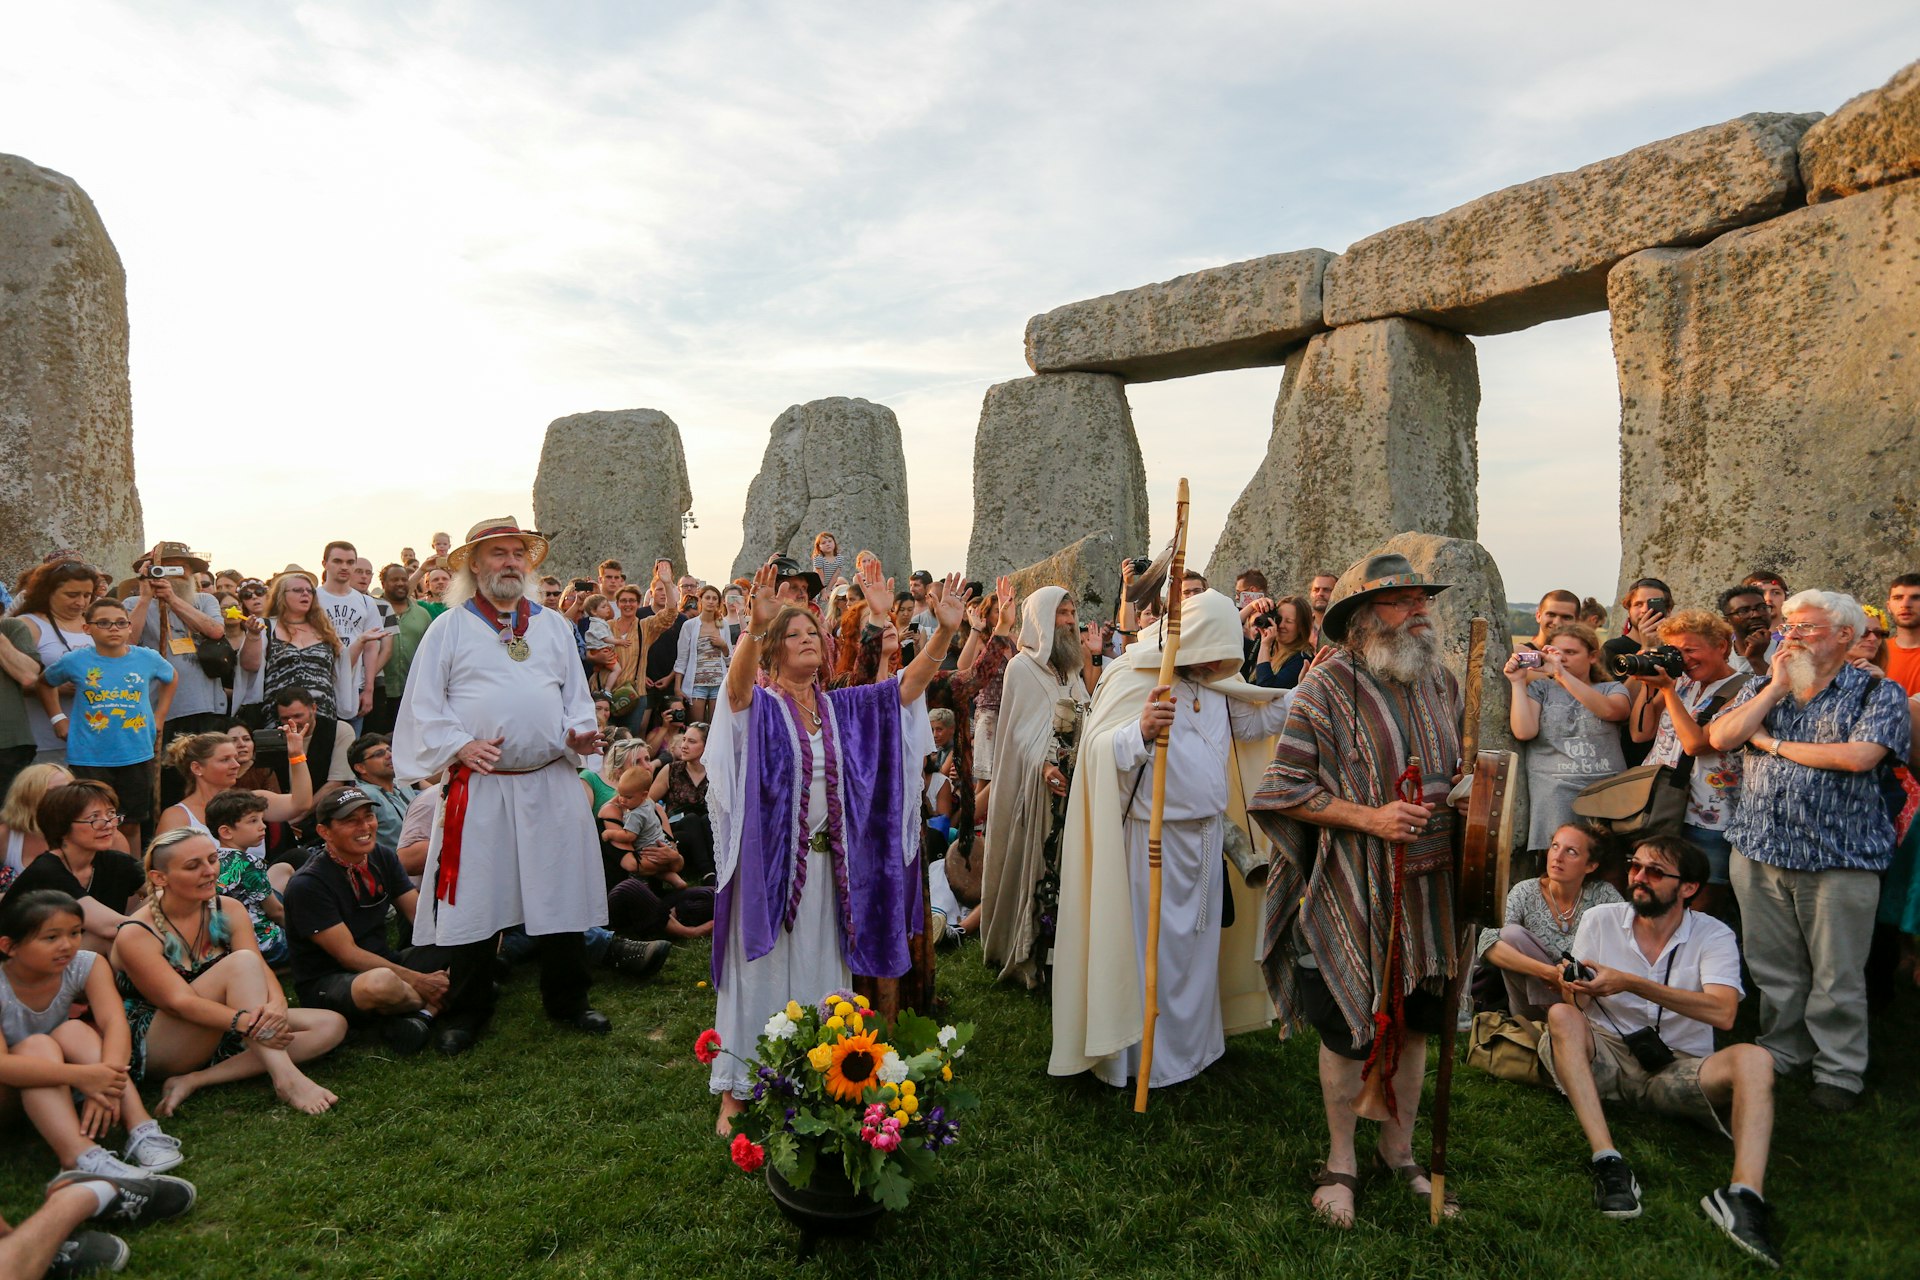  Revellers gather for the Summer Solstice at Stonehenge, Wiltshire from the eve of June 20th to sunrise on 21 June